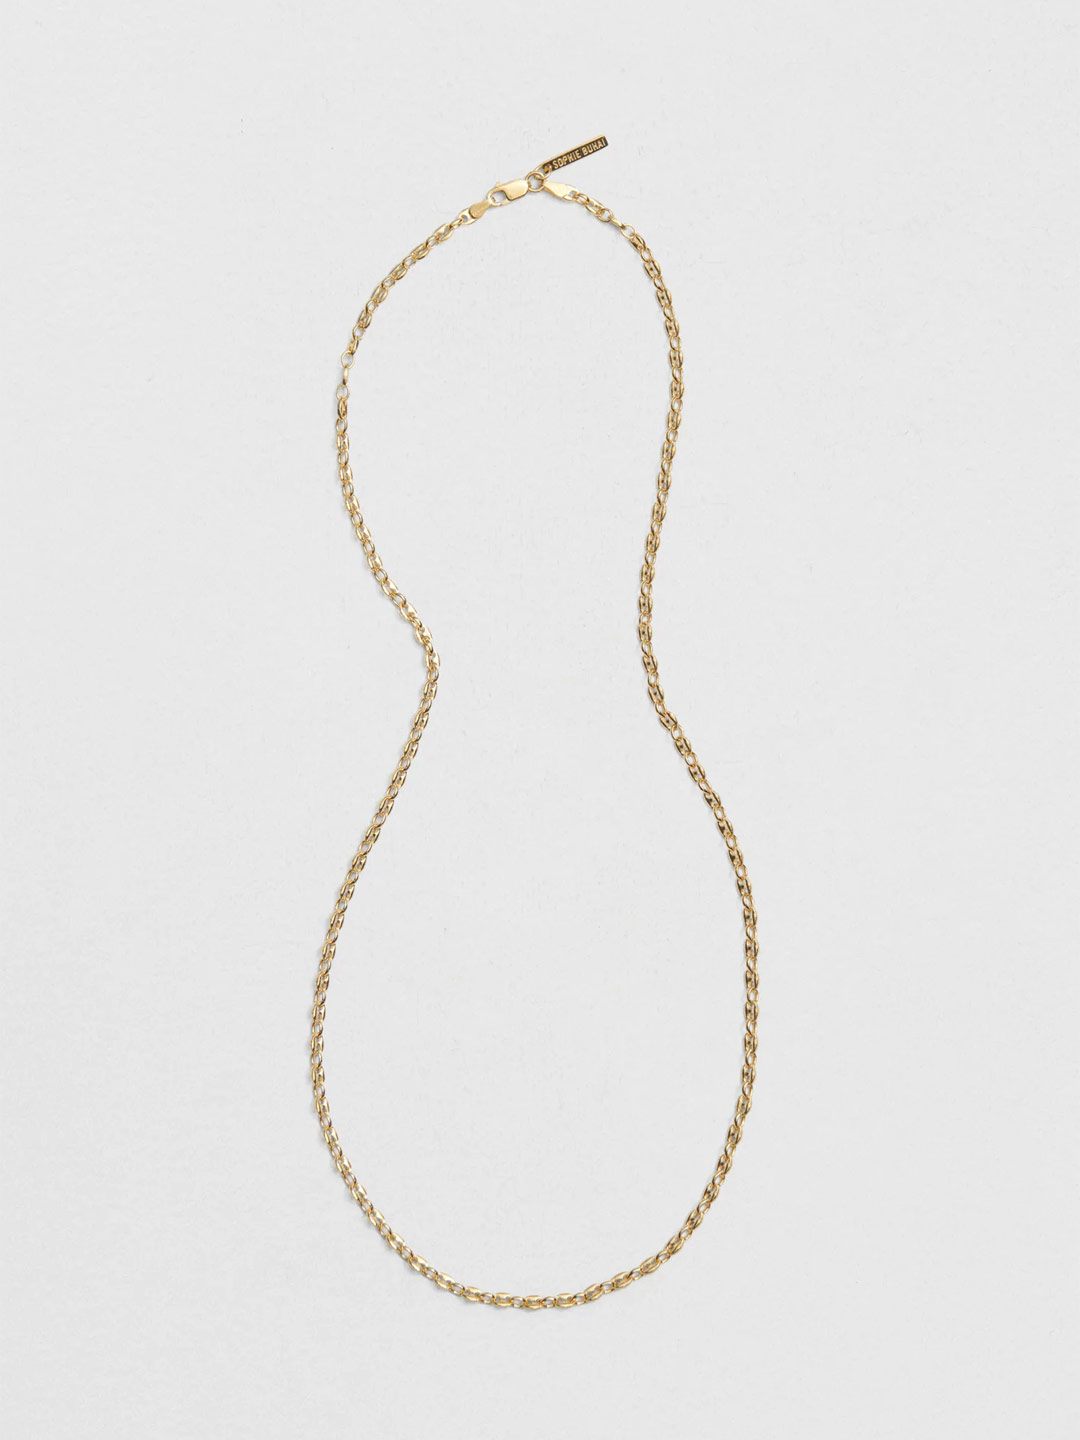 Long Classic Delicate Chain - Yellow Gold